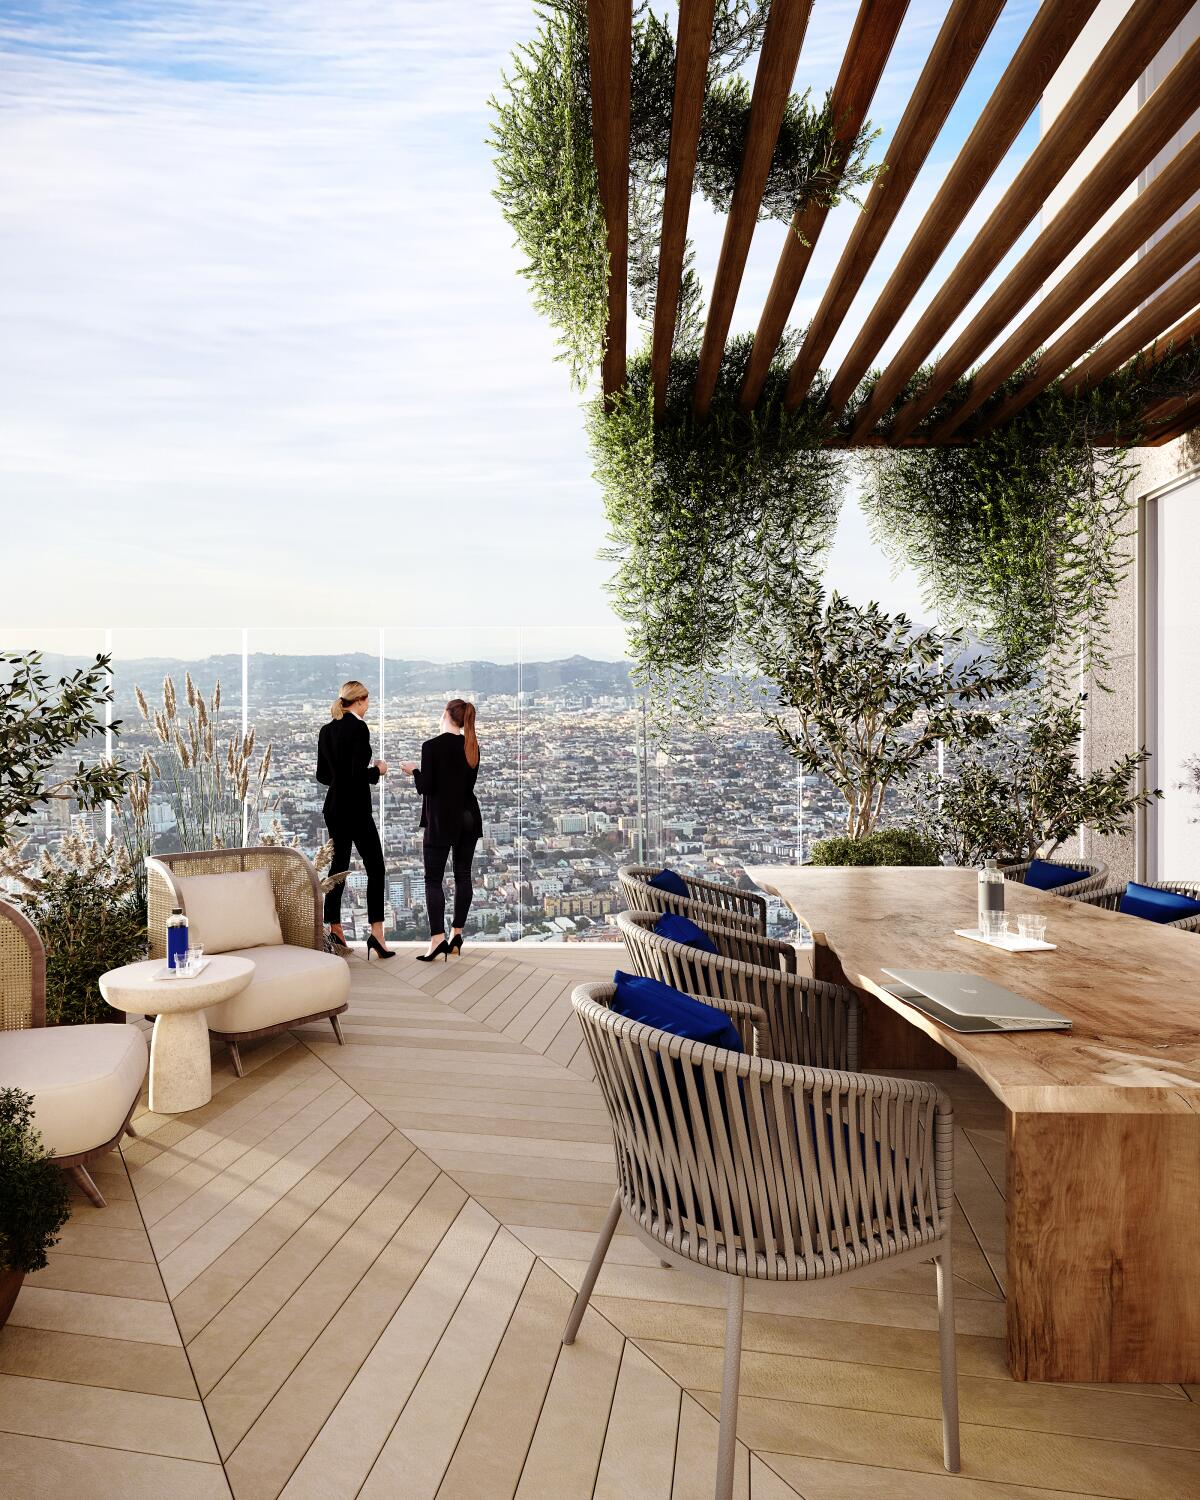 The landlord will create new outdoor terraces for tenants on four floors.